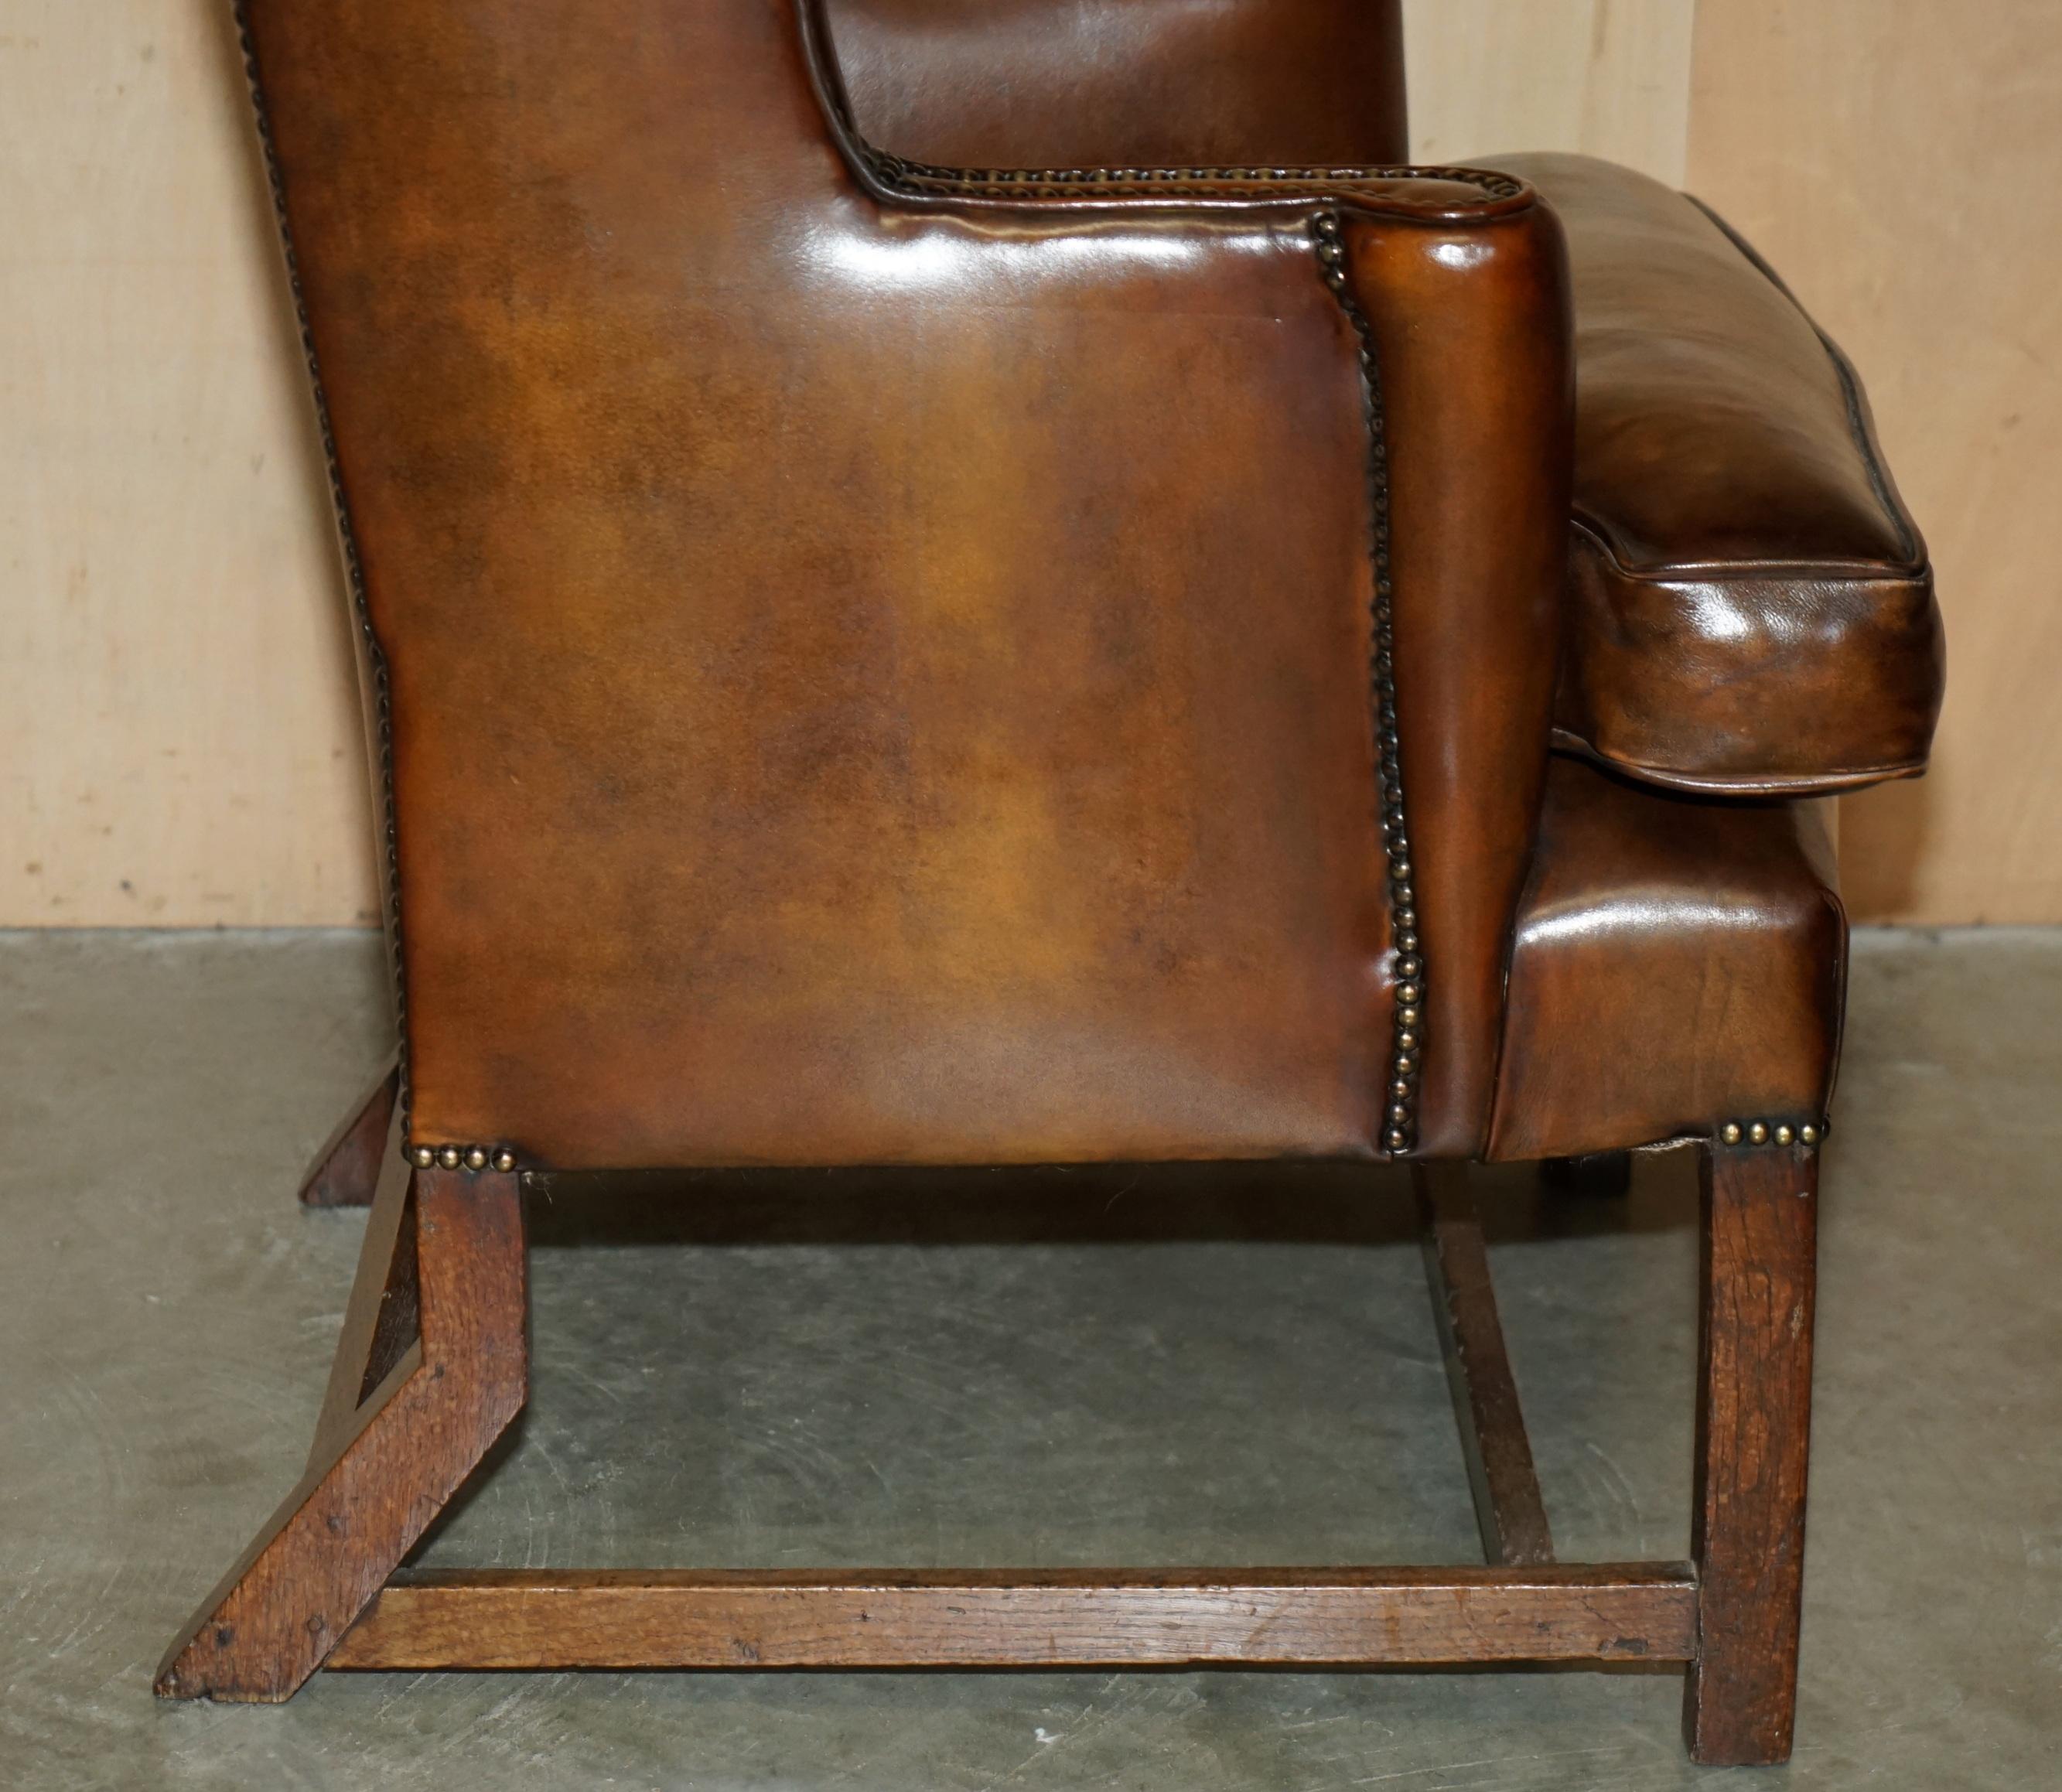 SUPER FINE RESTORED GEORGE III PERIOD CIRCA 1820 WiNGBACK BROWN LEATHER ARMCHAIR For Sale 4